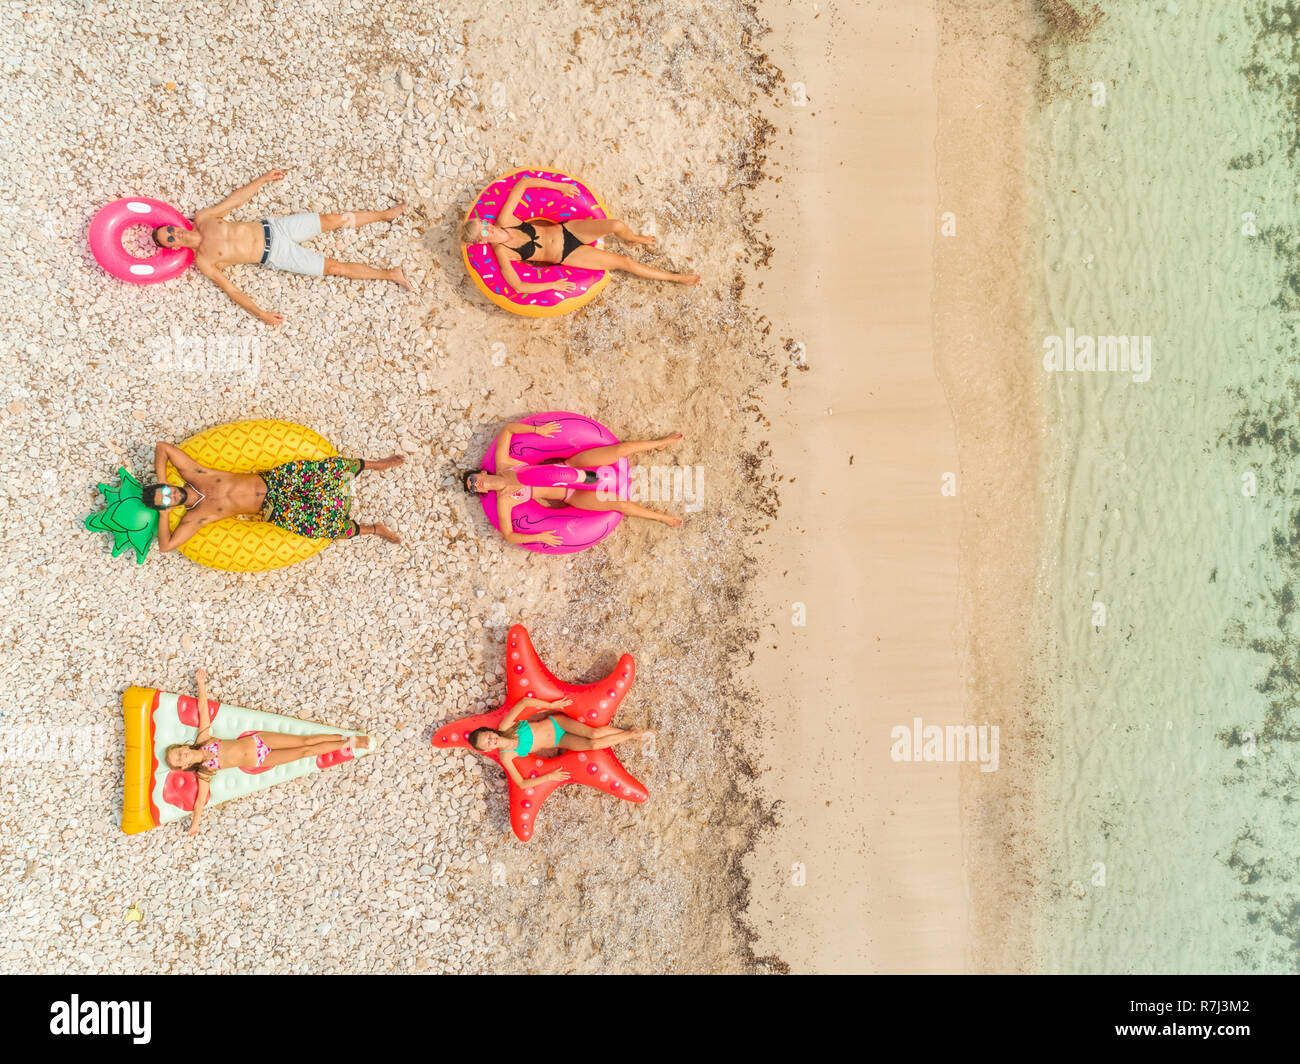 Aerial close up view of people lying on big inflatable pineapple, pizza, star, donut, flamingo shaped mattresses on beach. Stock Photo